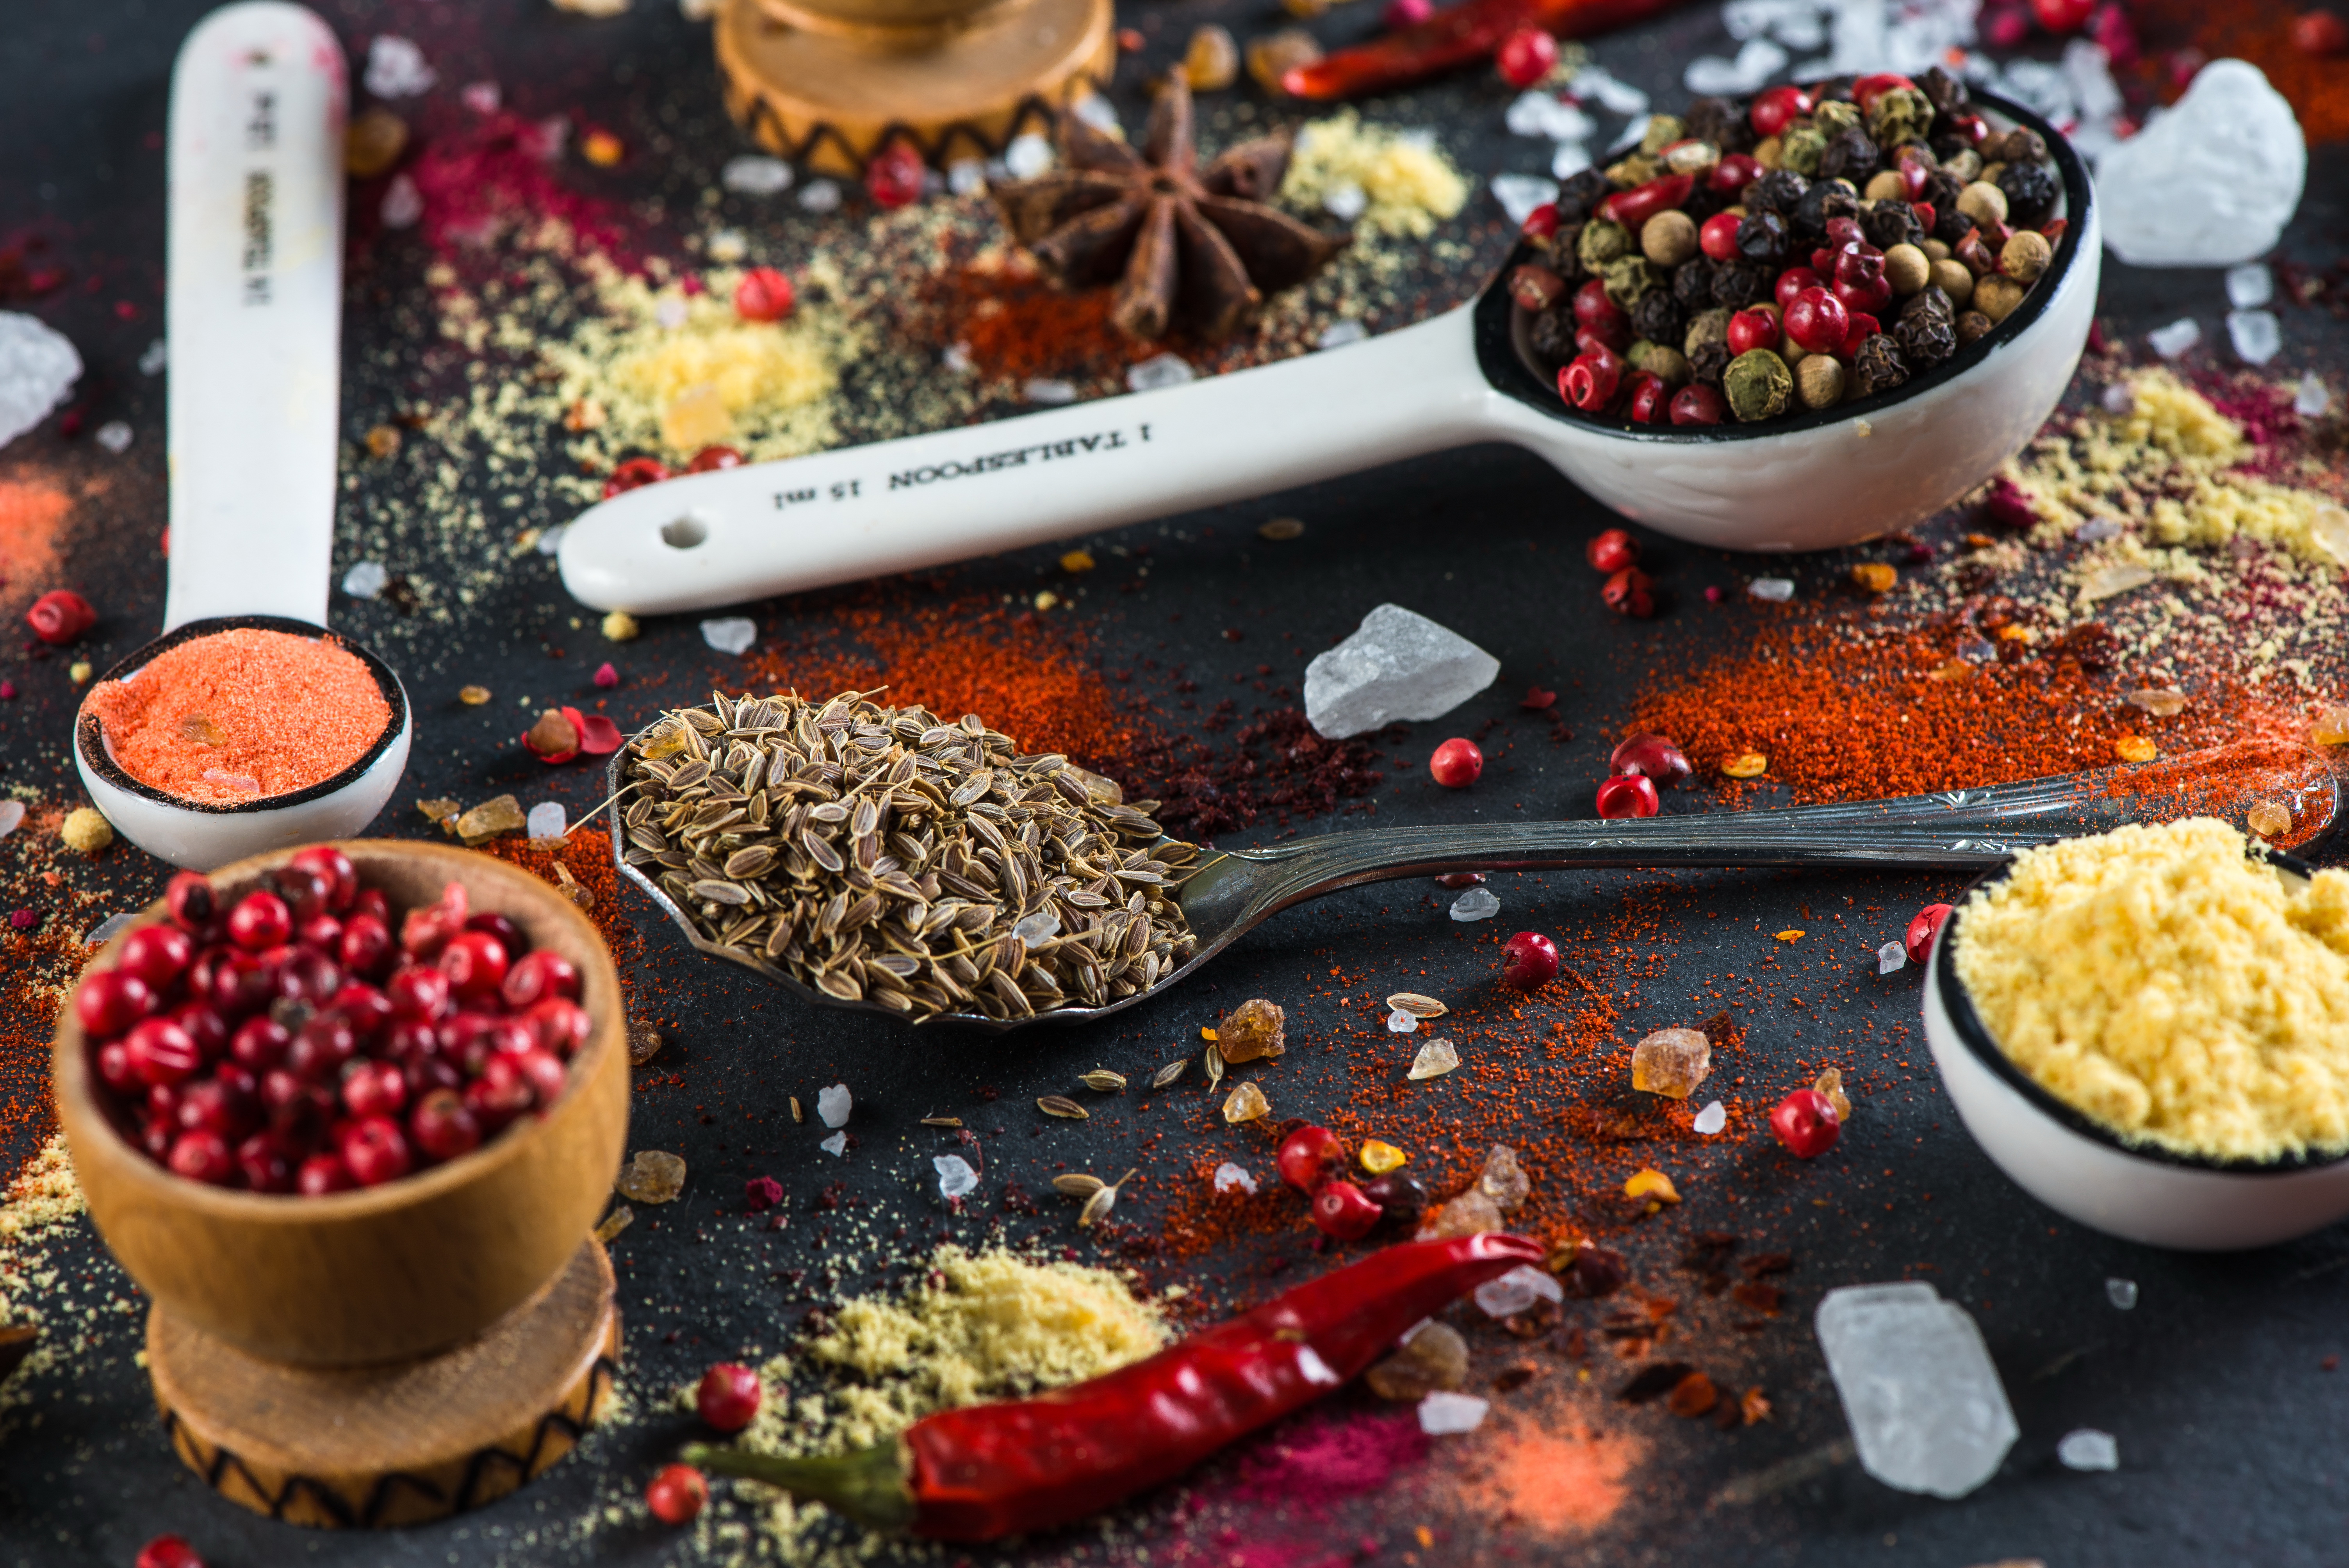 Food Herbs and Spices HD Wallpaper | Background Image